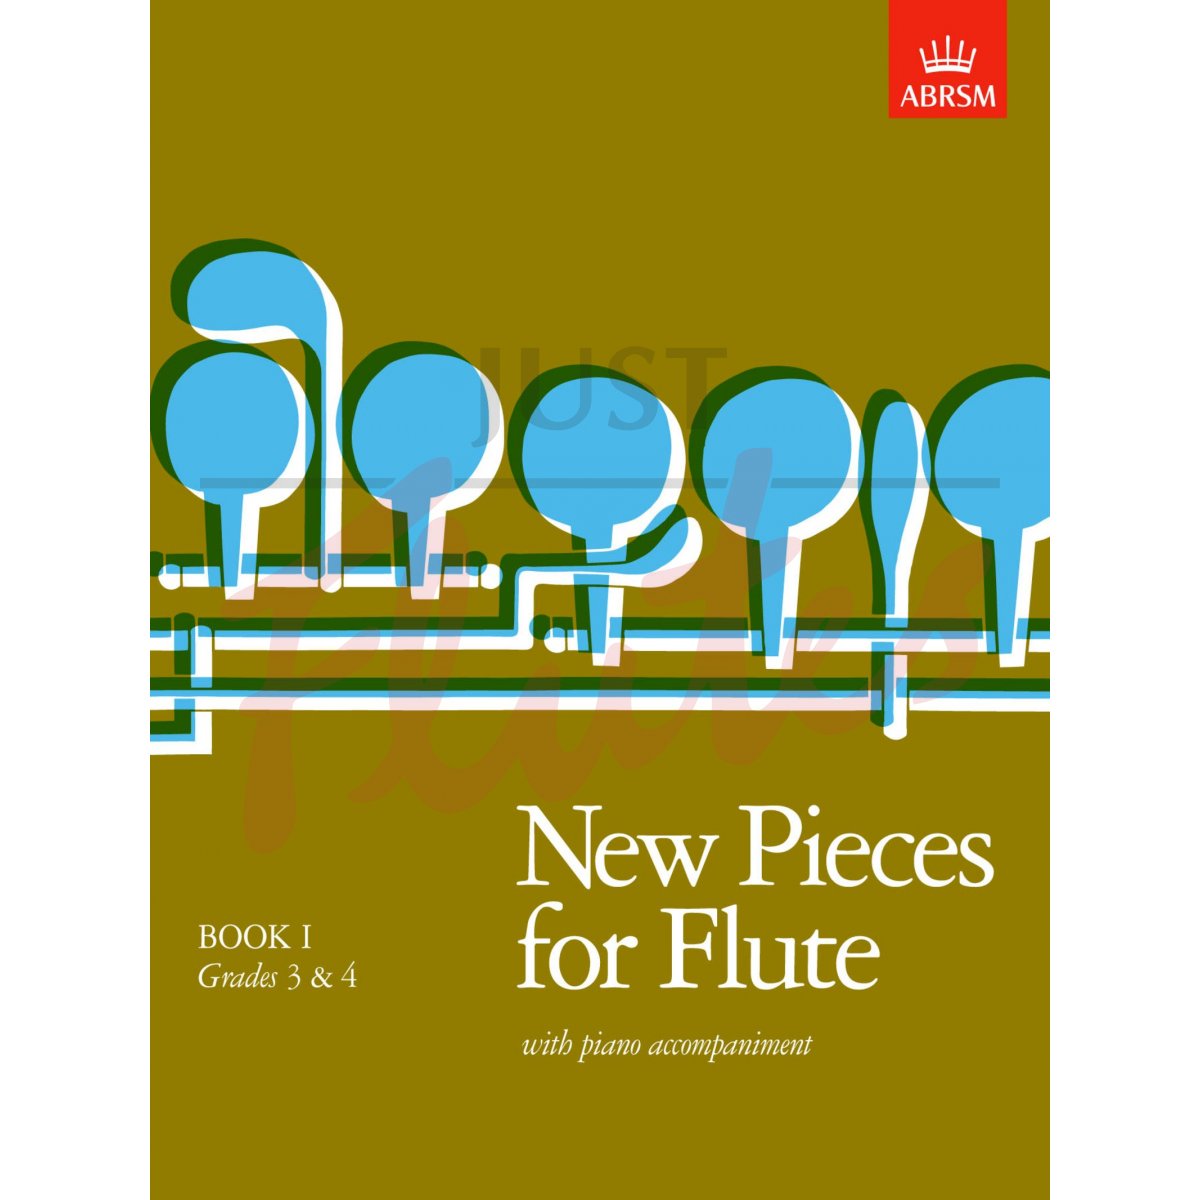 New Pieces for Flute Vol 1